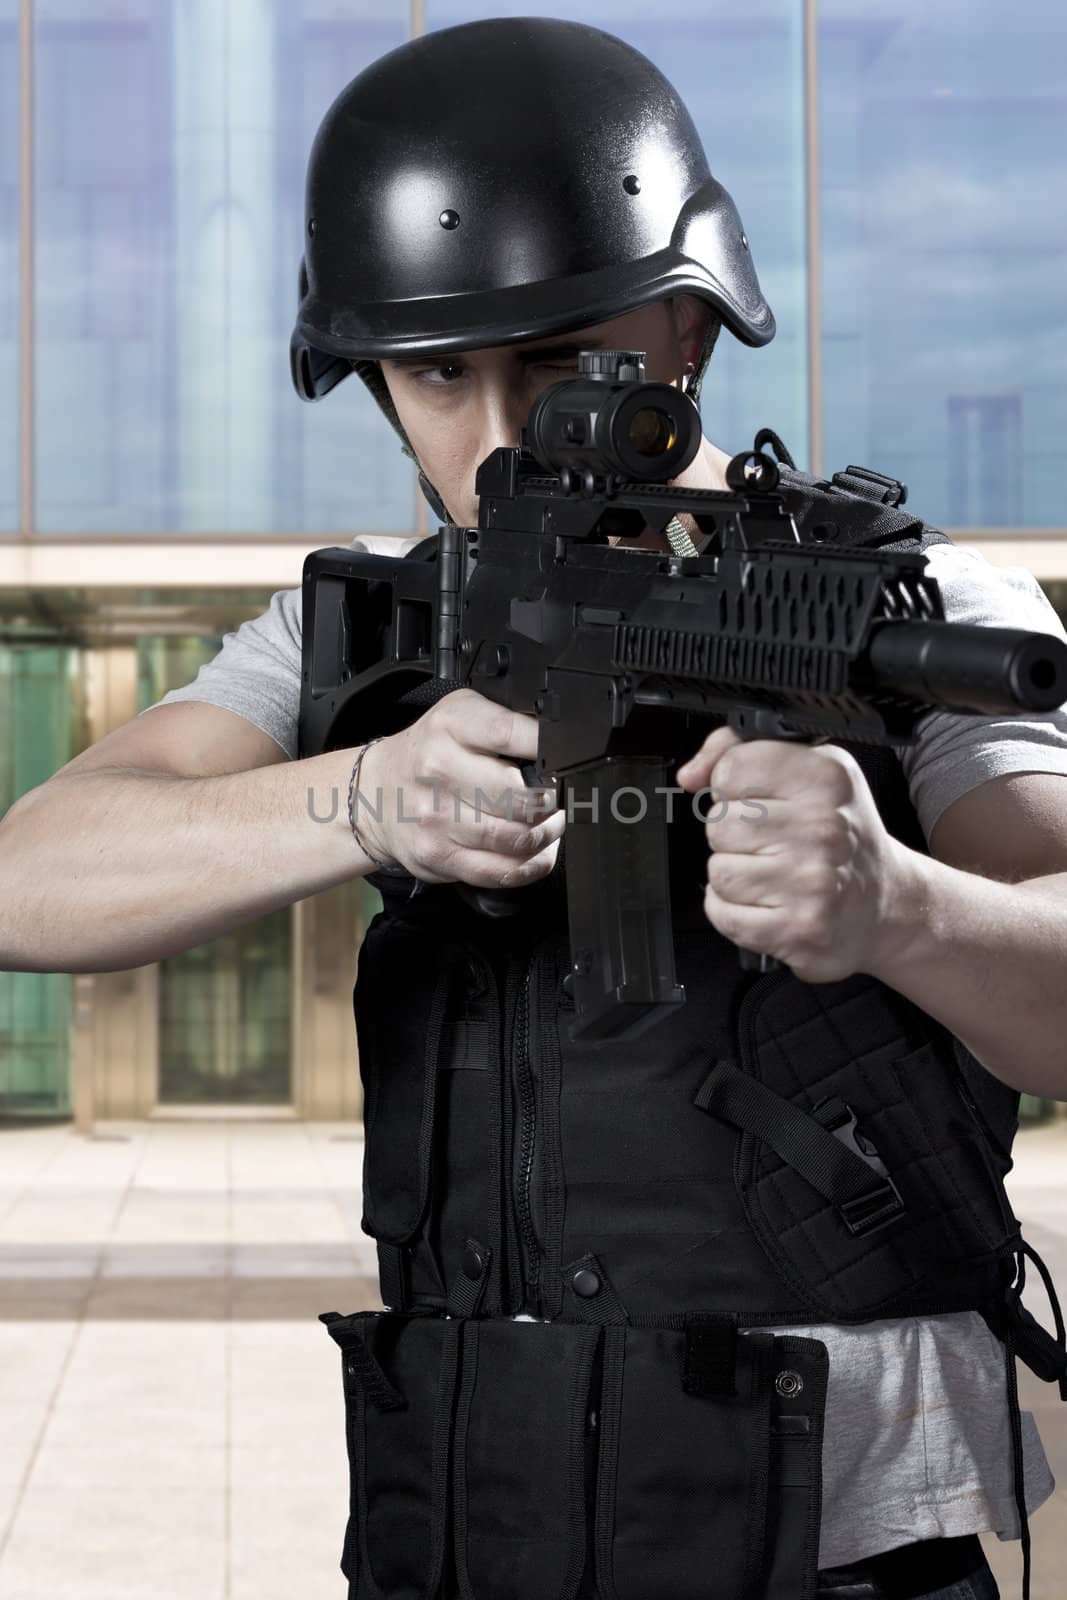 armed policemen, aiming frontal view details